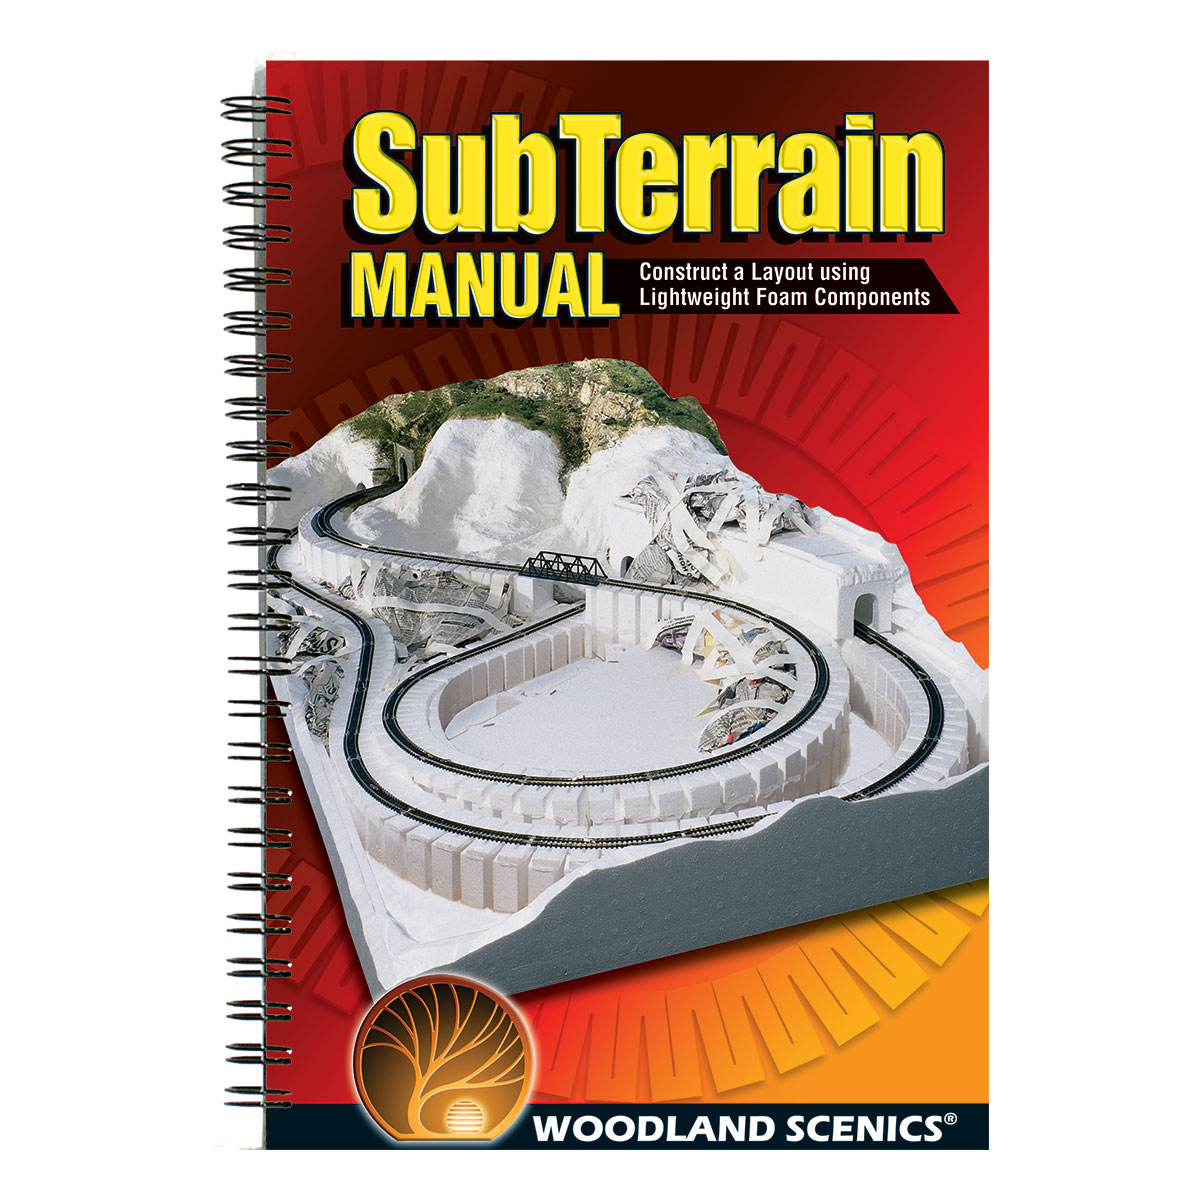 SubTerrain Manual - The SubTerrain Manual is no longer in stock or available for purchase